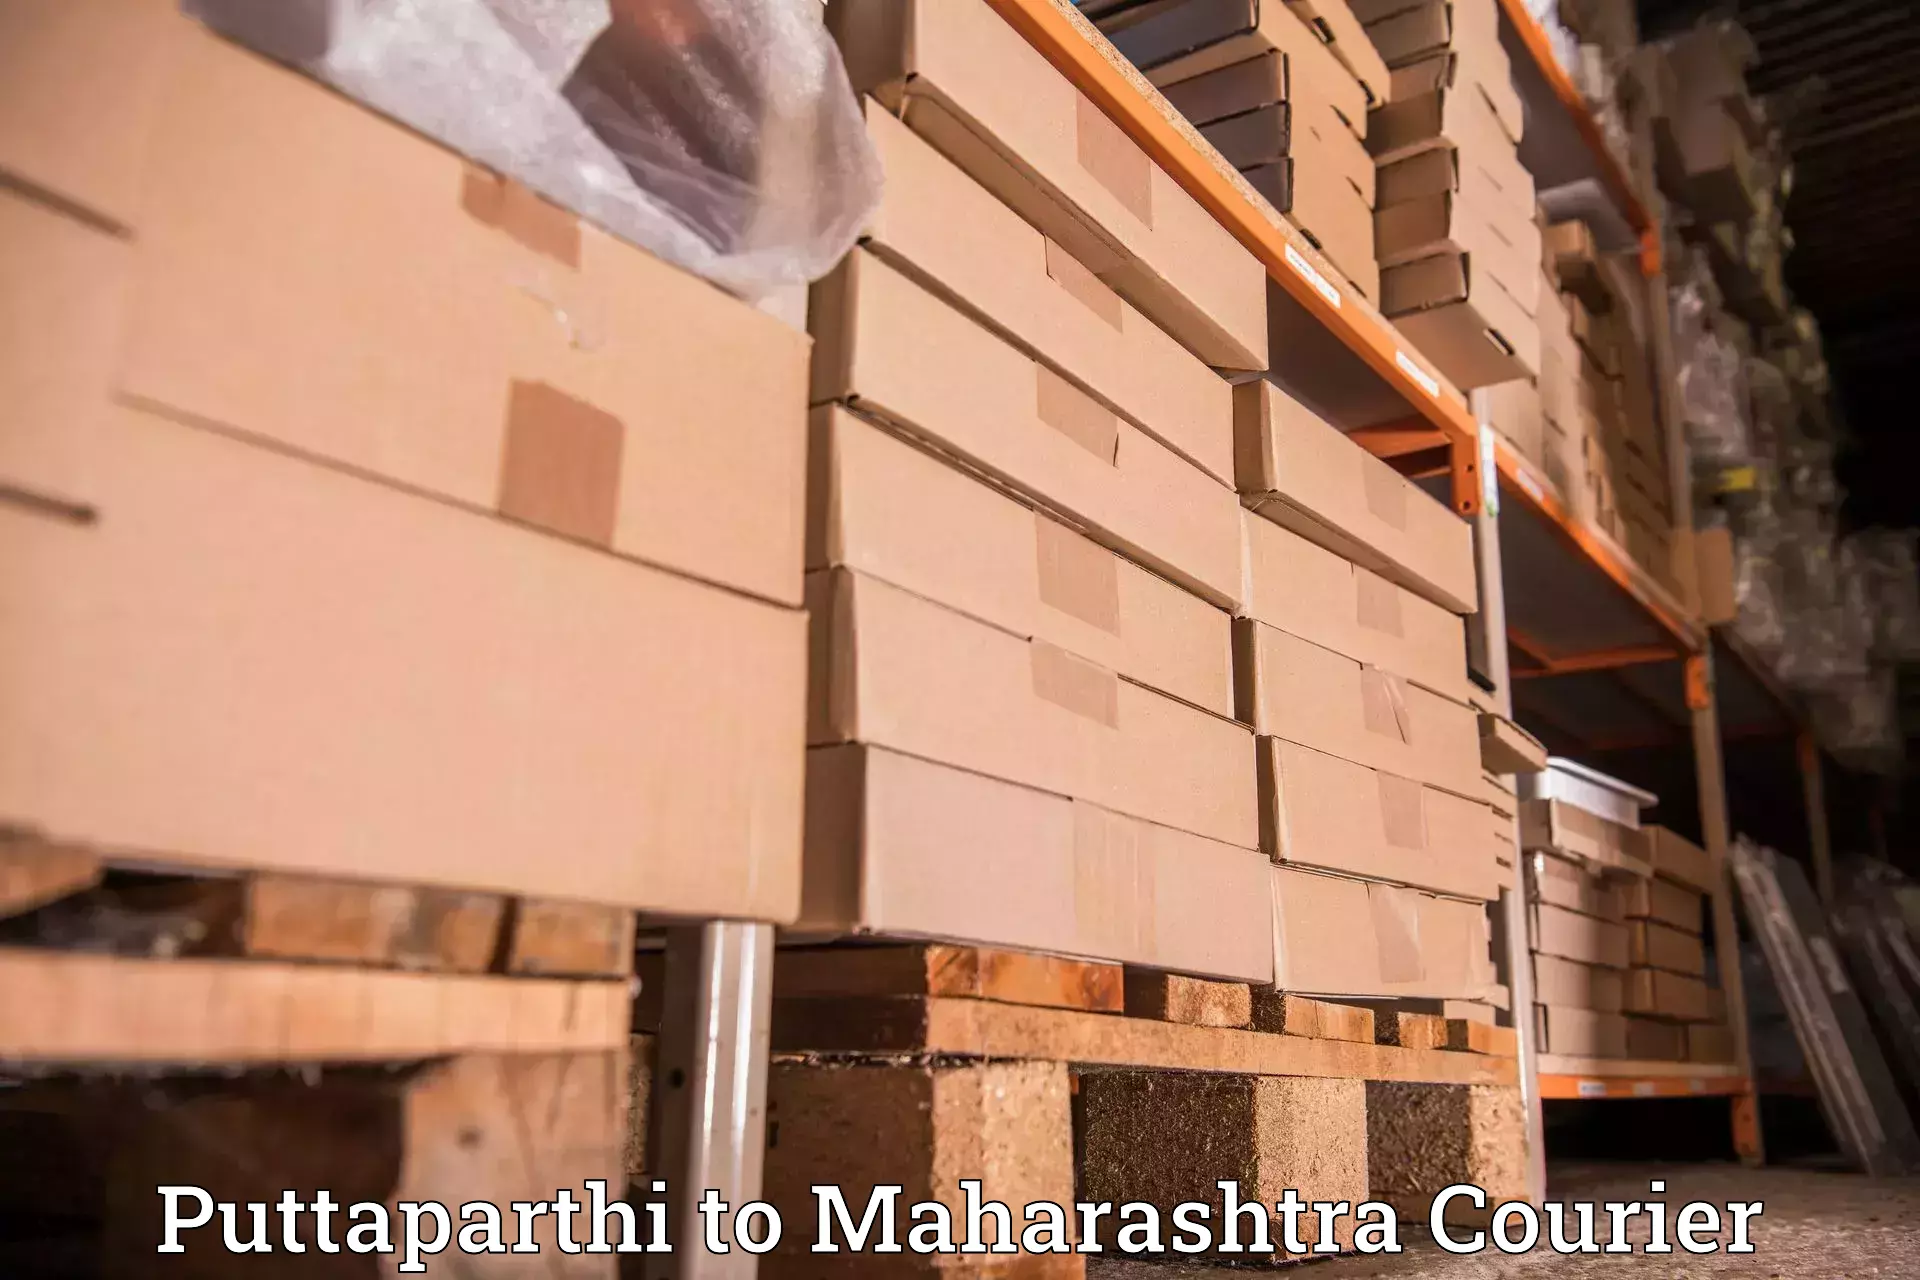 Supply chain delivery in Puttaparthi to Murbad